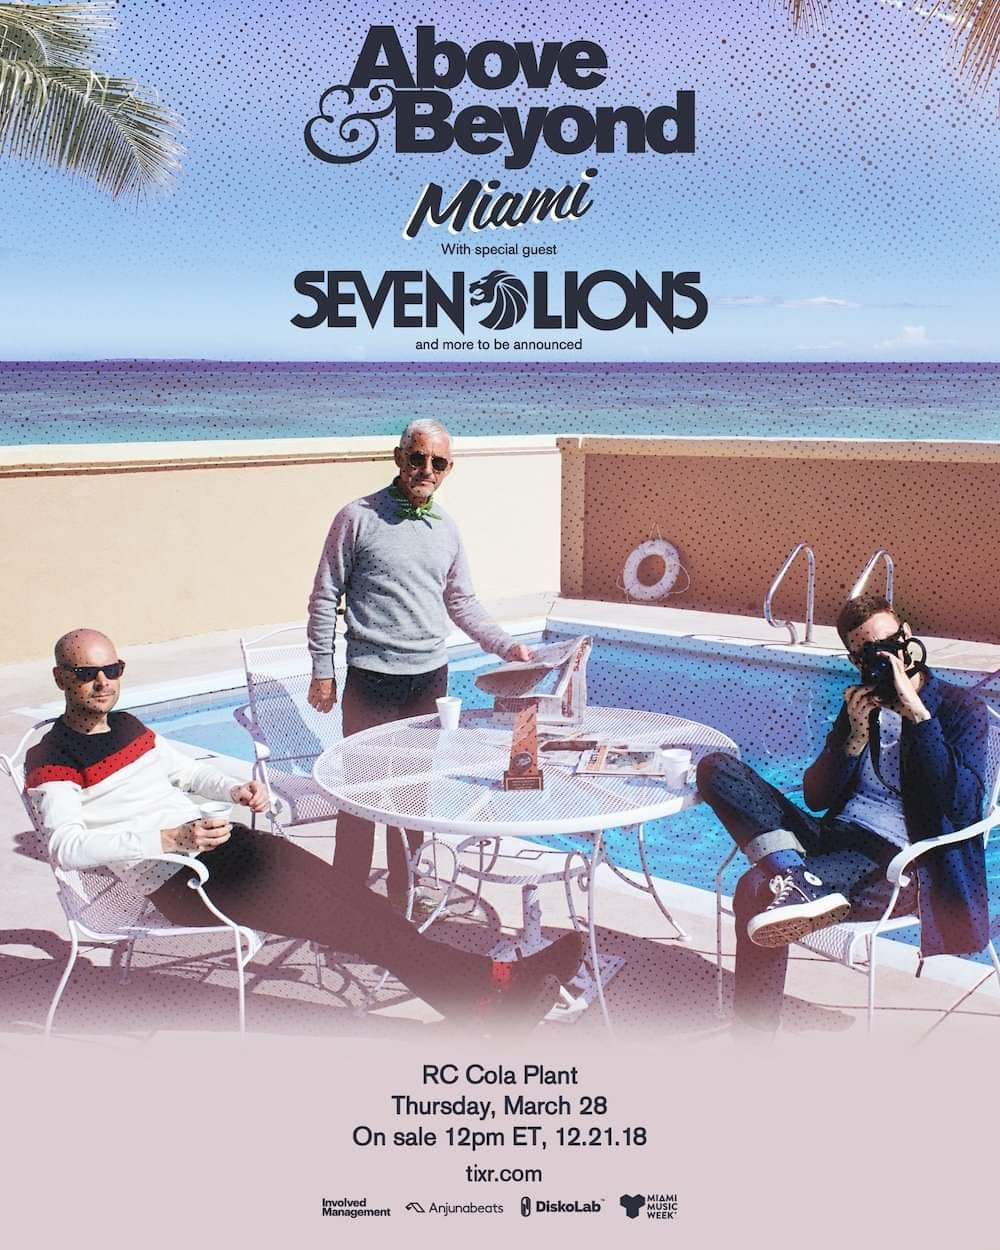 Above & Beyond Miami 2019 Announcement Flyer